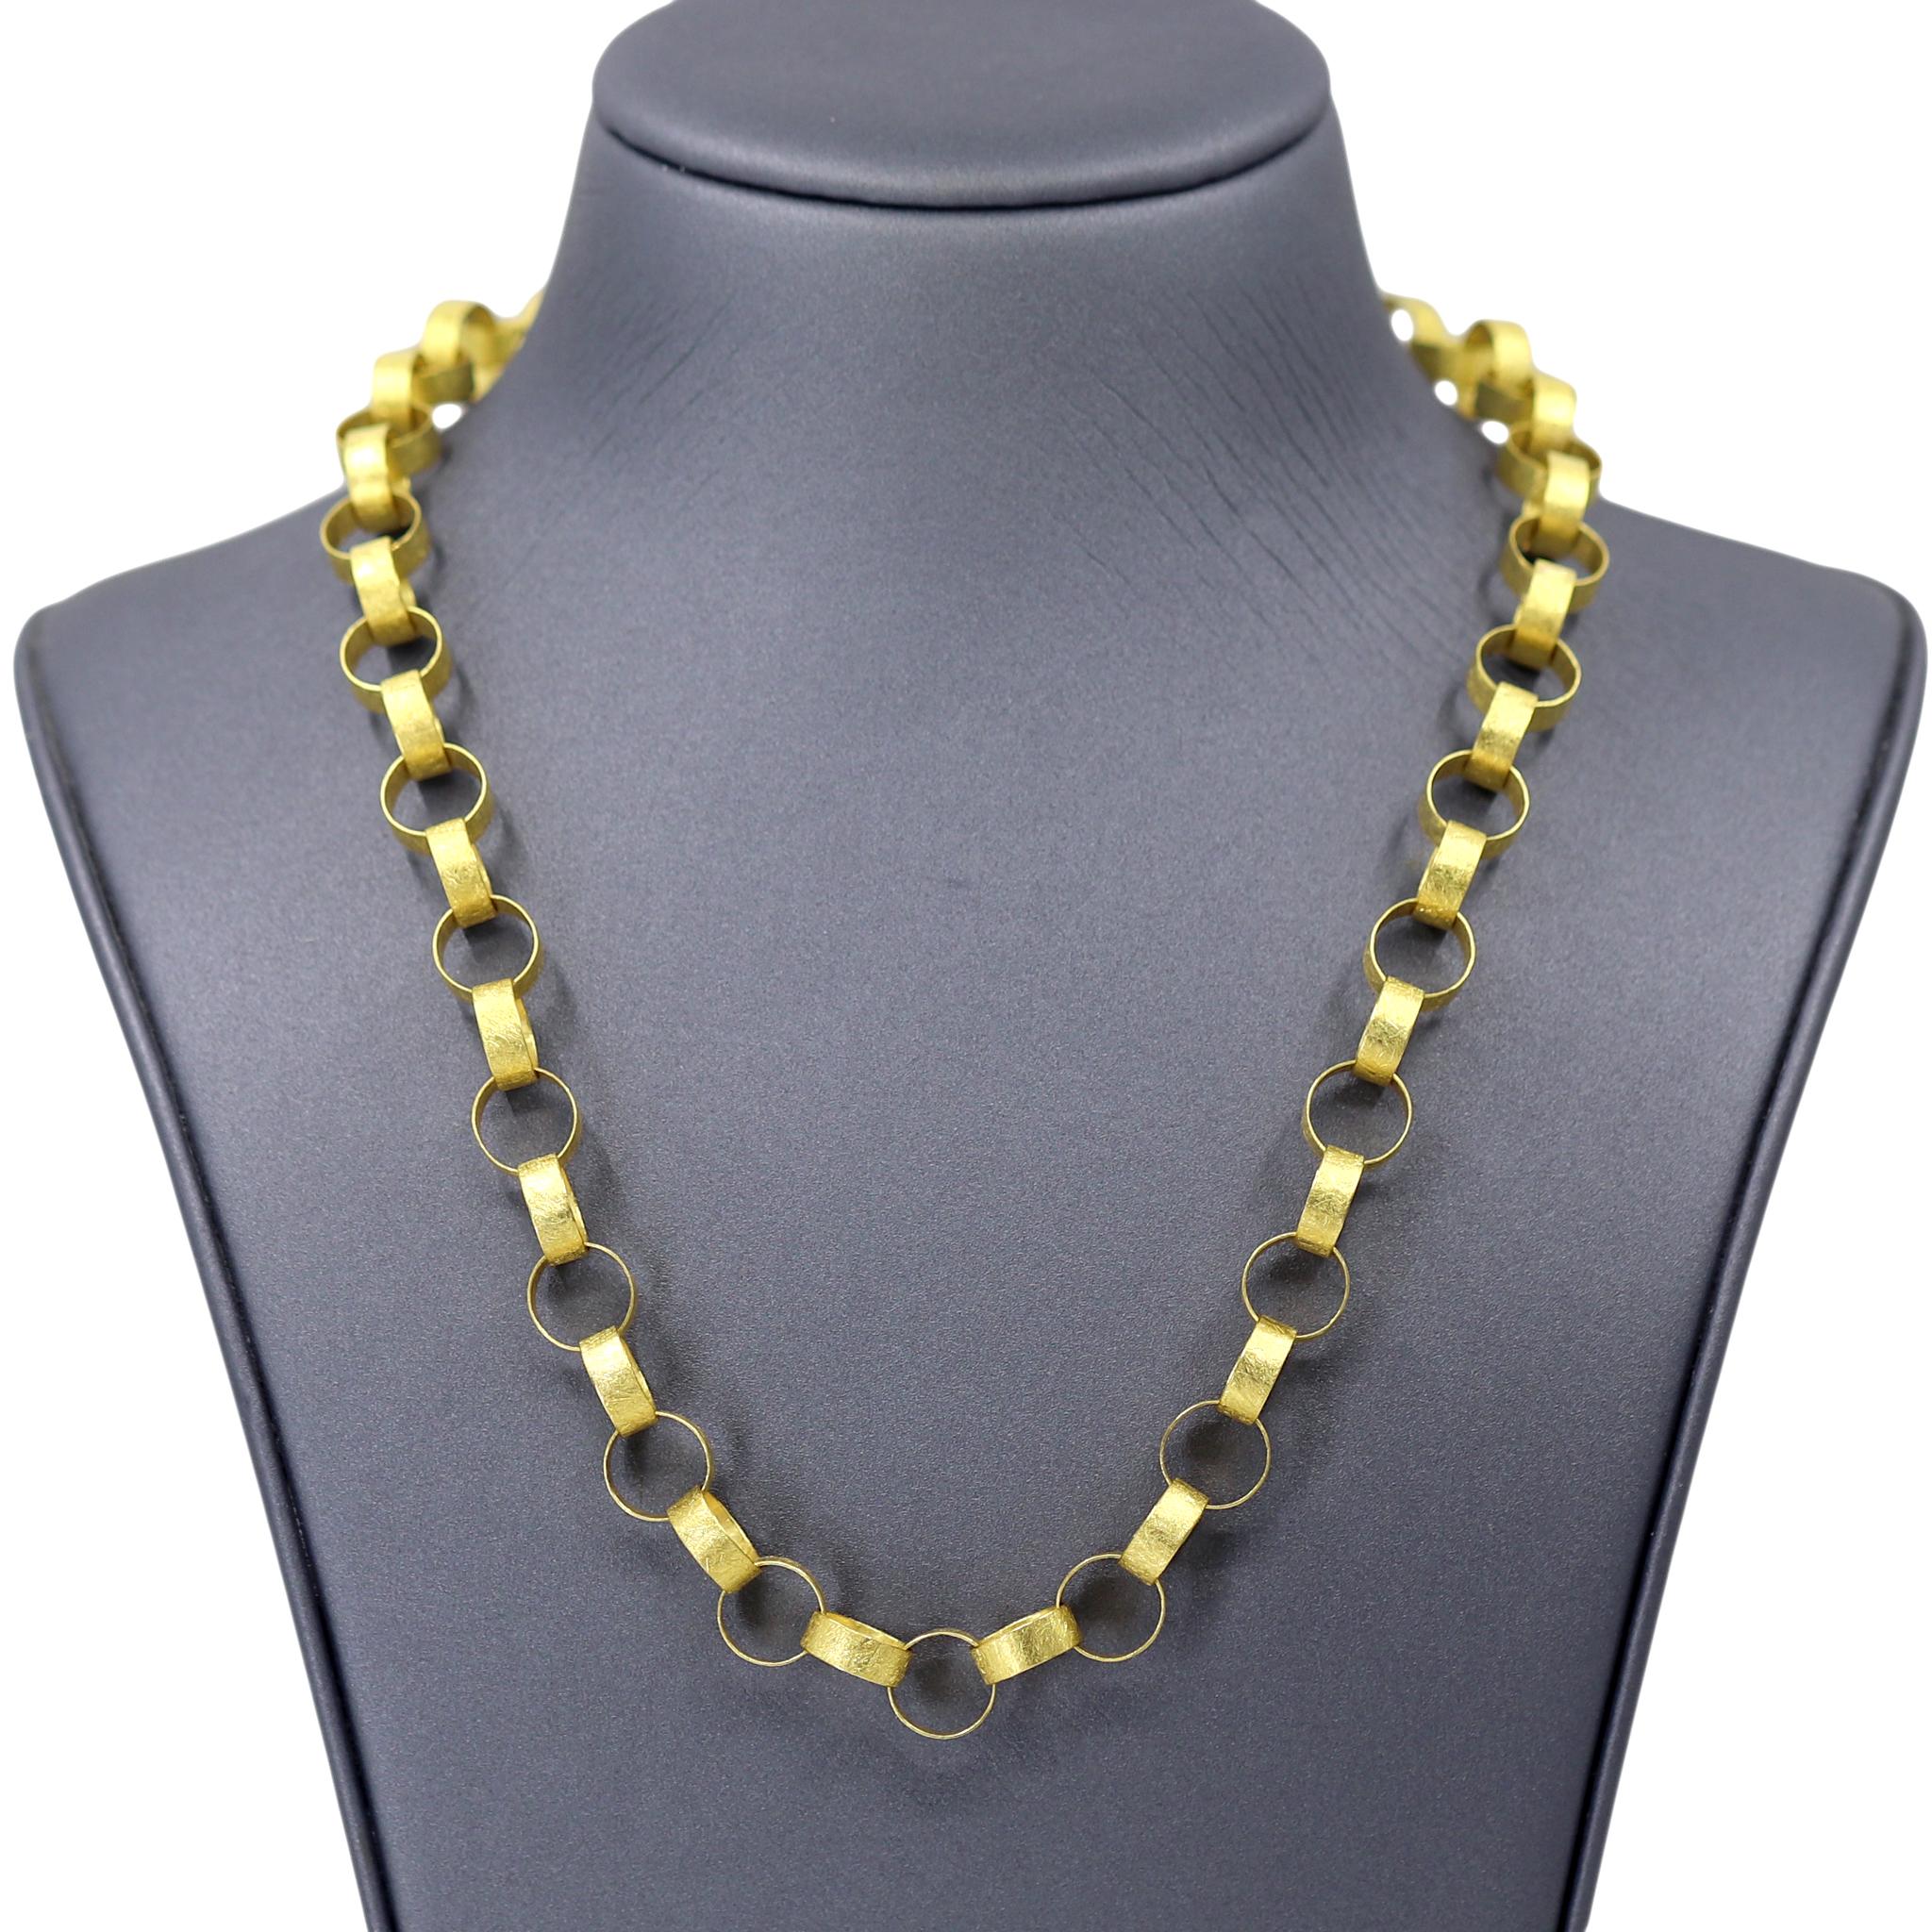 Heavy Round Paper Chain Link Necklace handmade by jewelry artist Petra Class featuring fifty-five individually and intricately hand-fabricated 22k yellow gold links highlighted by the artist's signature finish. The artisan chain measures 18 inches